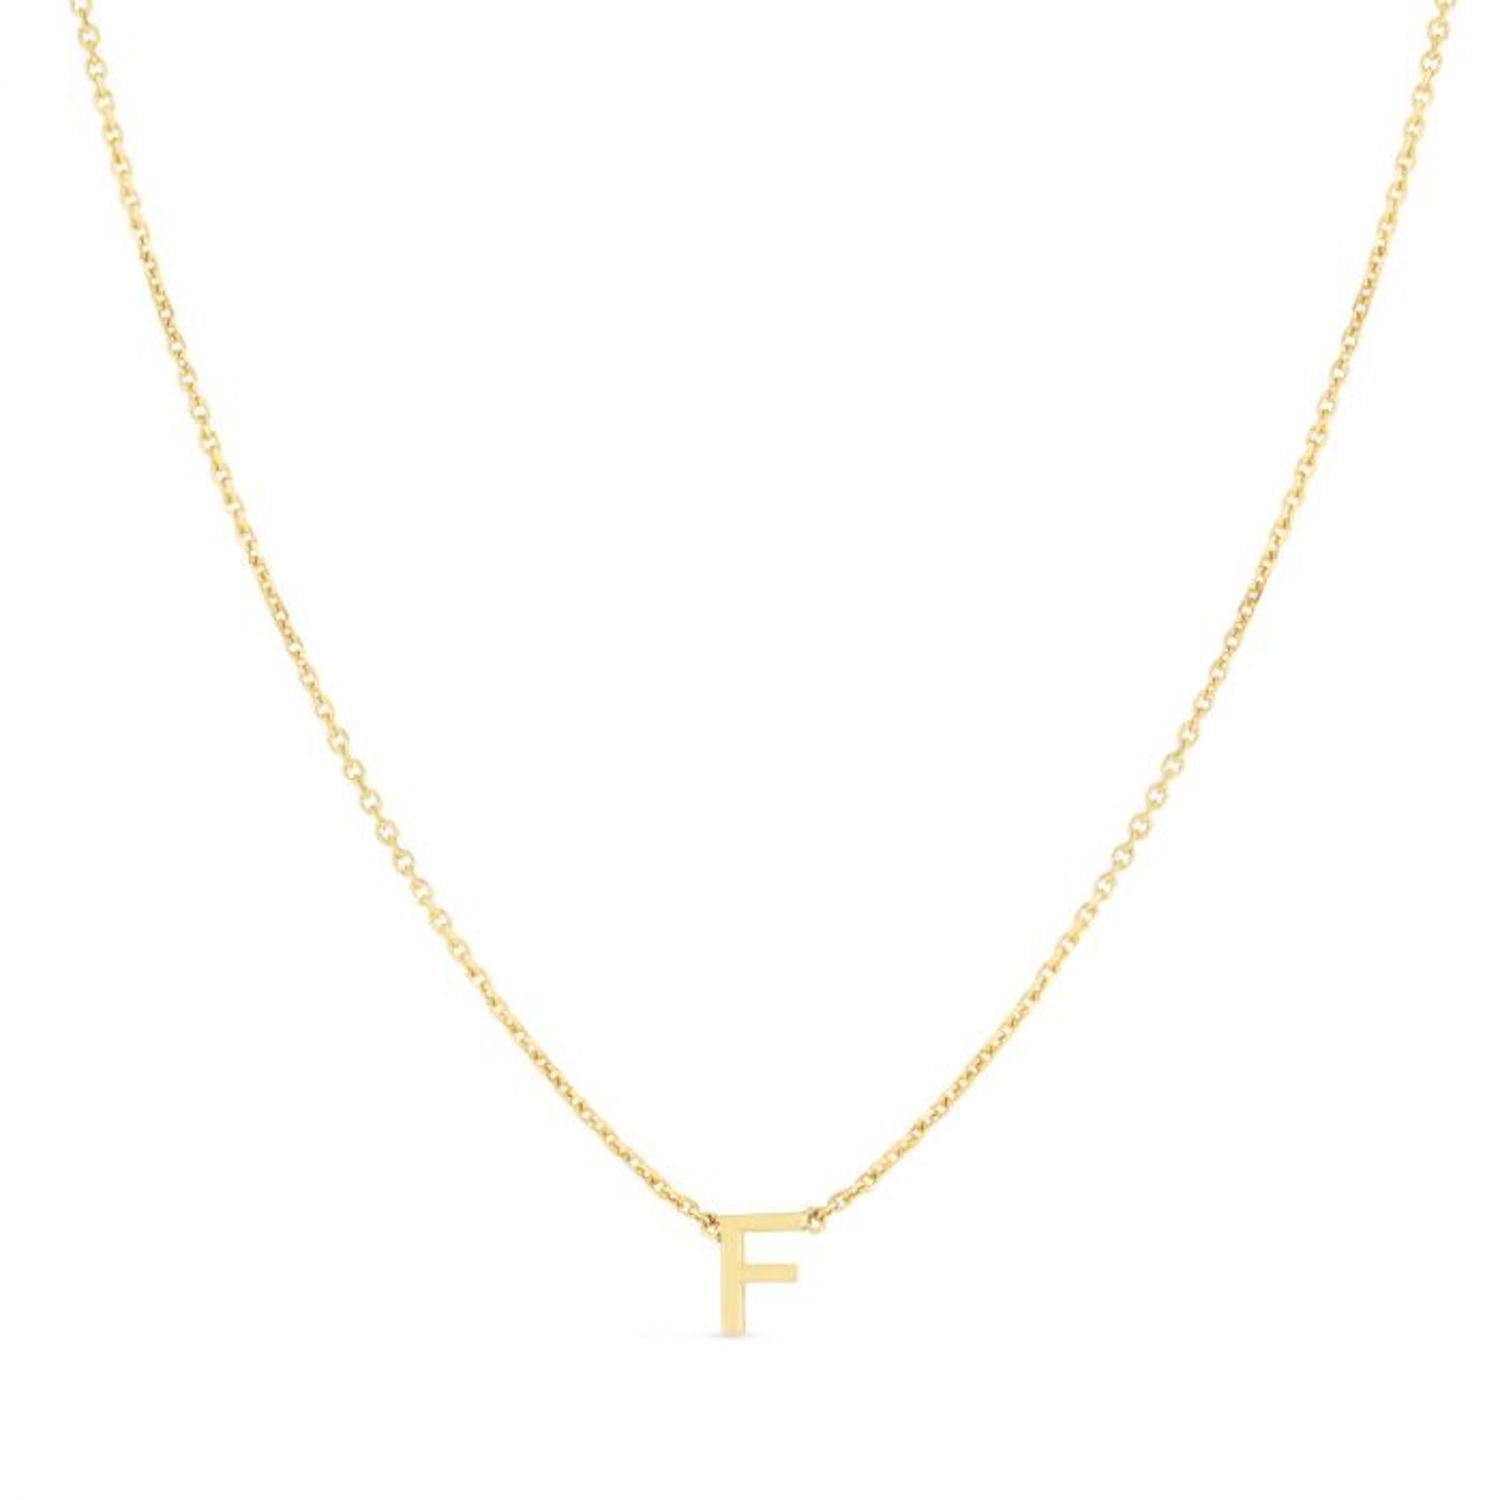 14K Yellow Gold Letter Initials Pendant Necklace 16"-18" - F